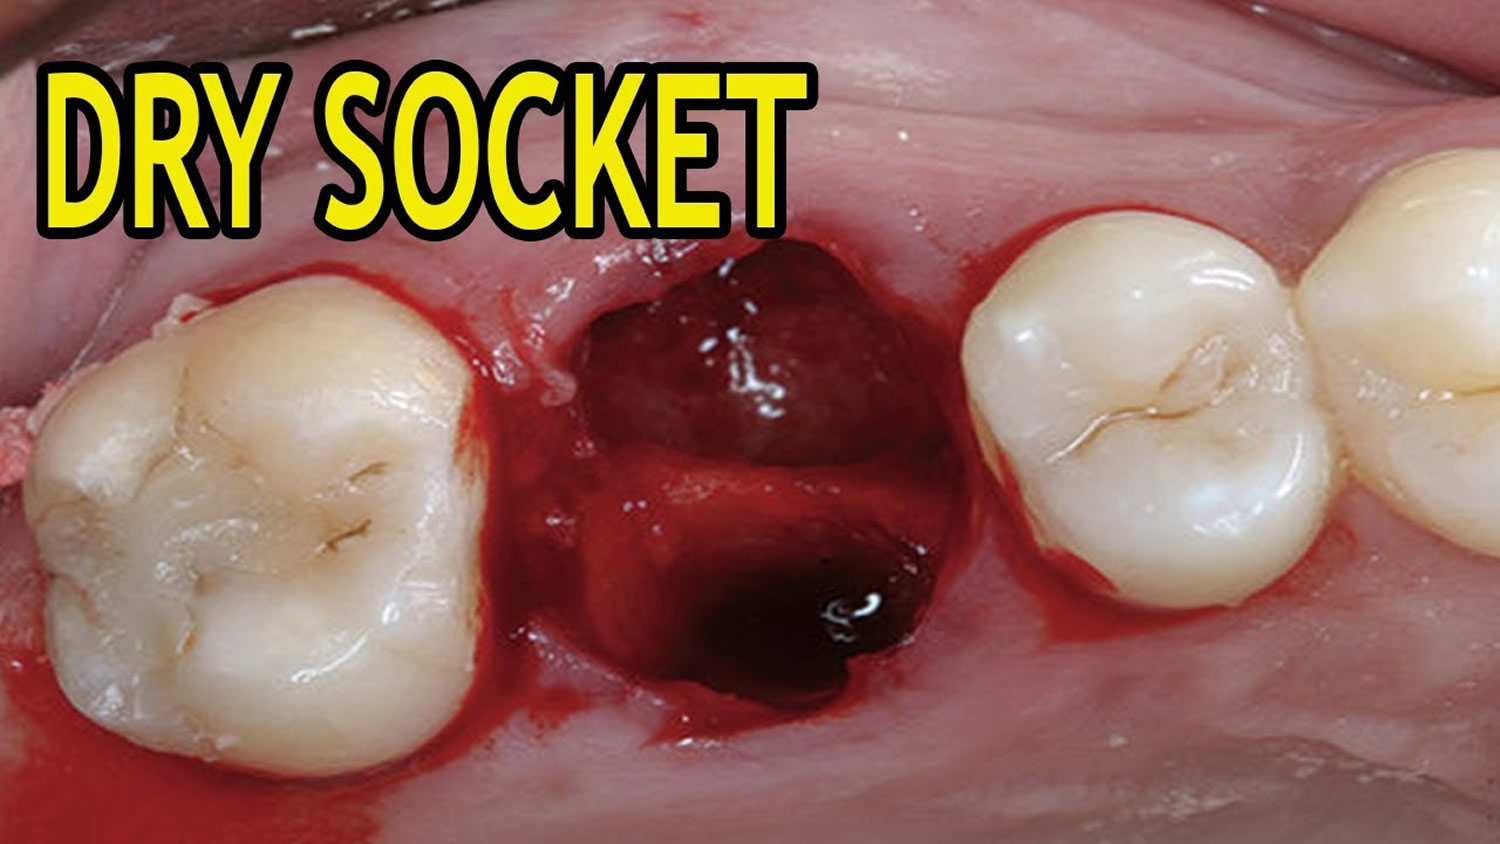 Dry Socket - Causes, Signs, Symptoms, Prevention & Treatment